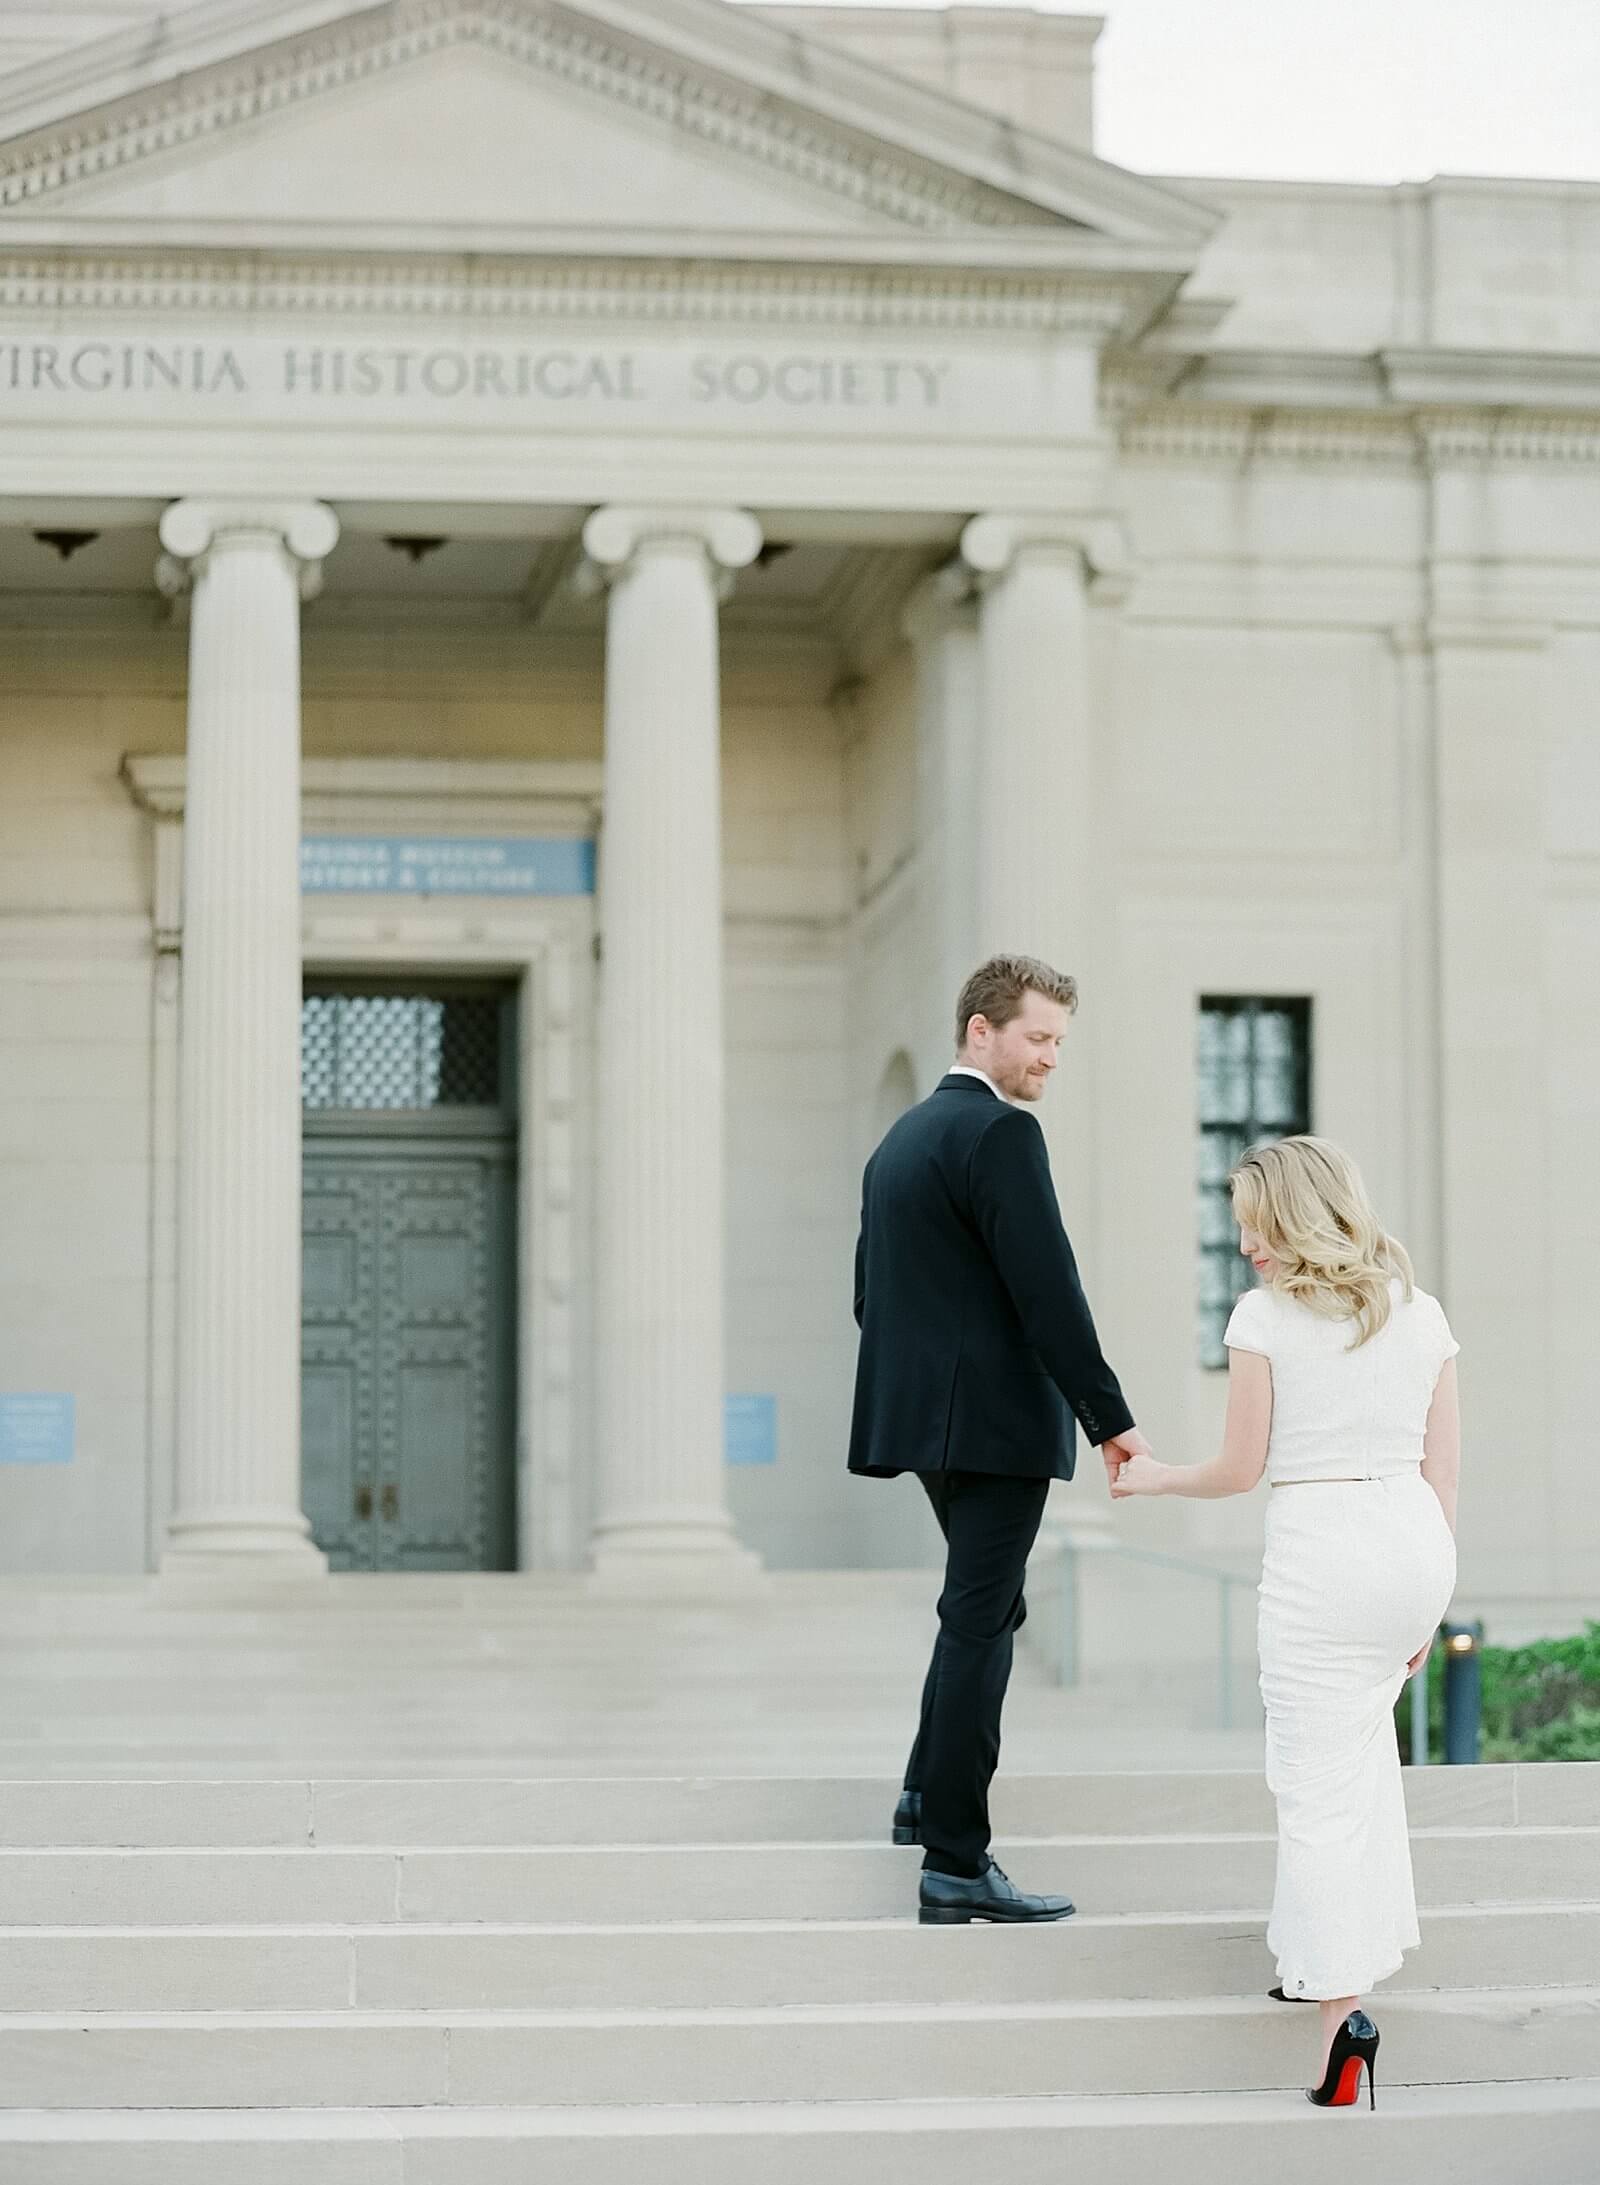 Couple amending the steps of the Virginia historical society during their engagement session